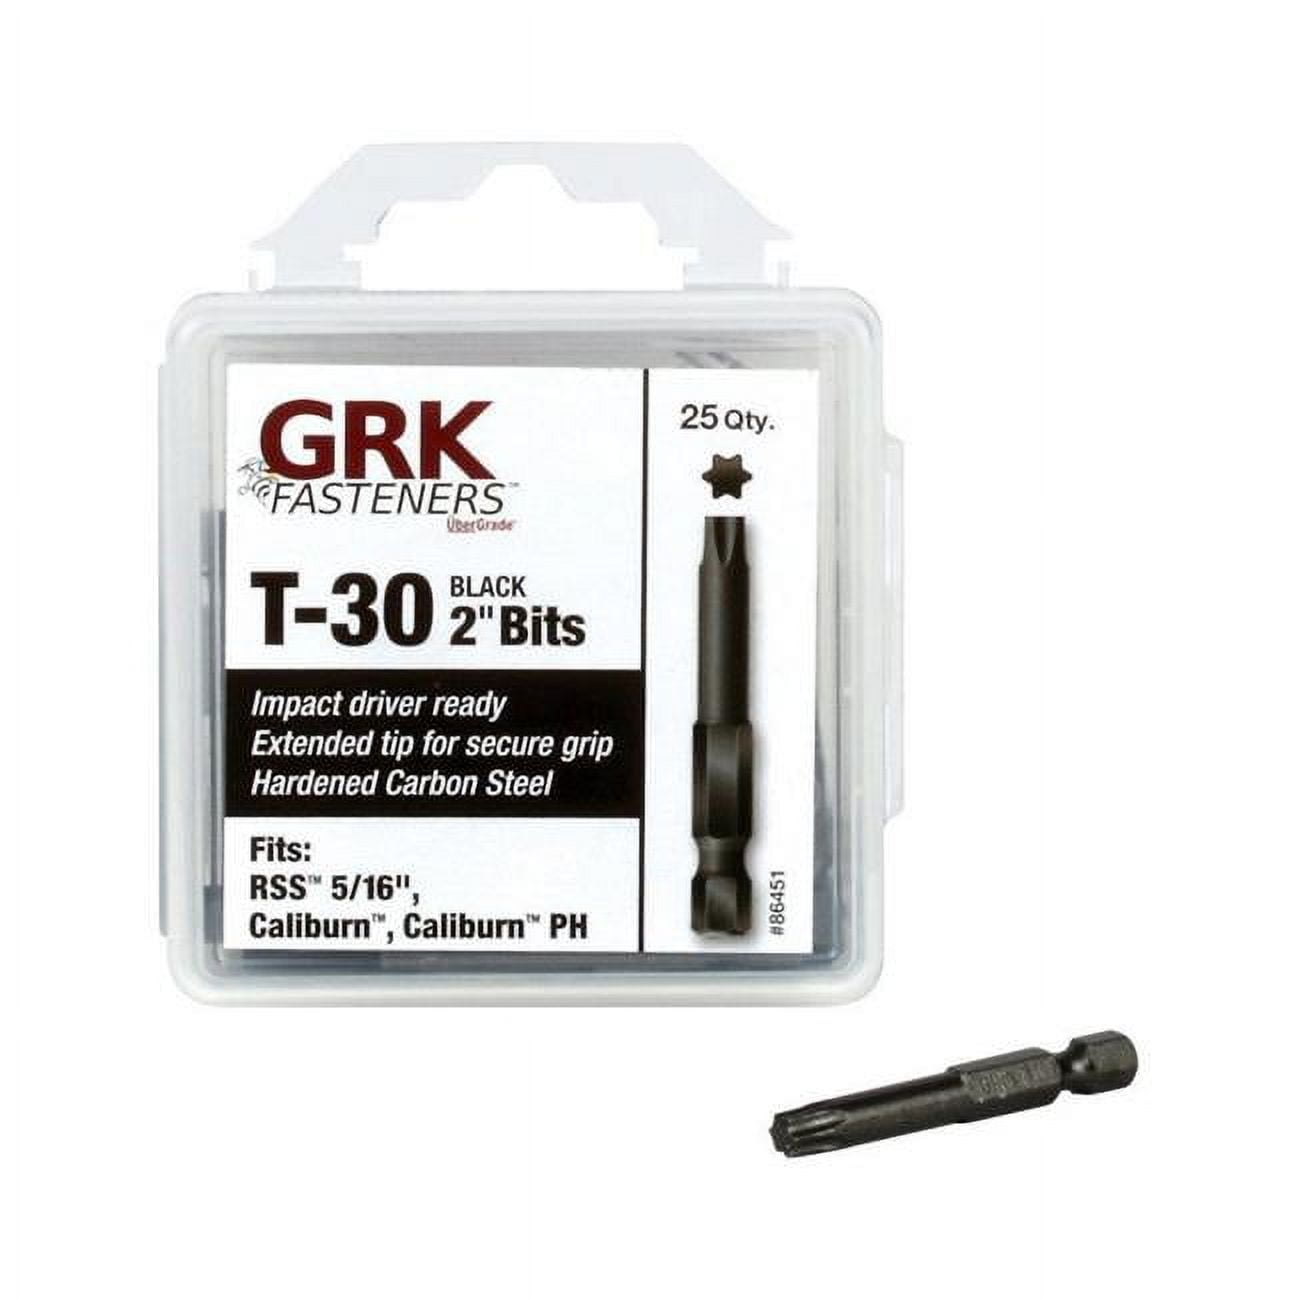 Picture of GRK Fasteners 2824753 T-30 x 2 in. Star Carbon Steel 0.25 in. Hex Shank Impact Power Bit - 25 Piece